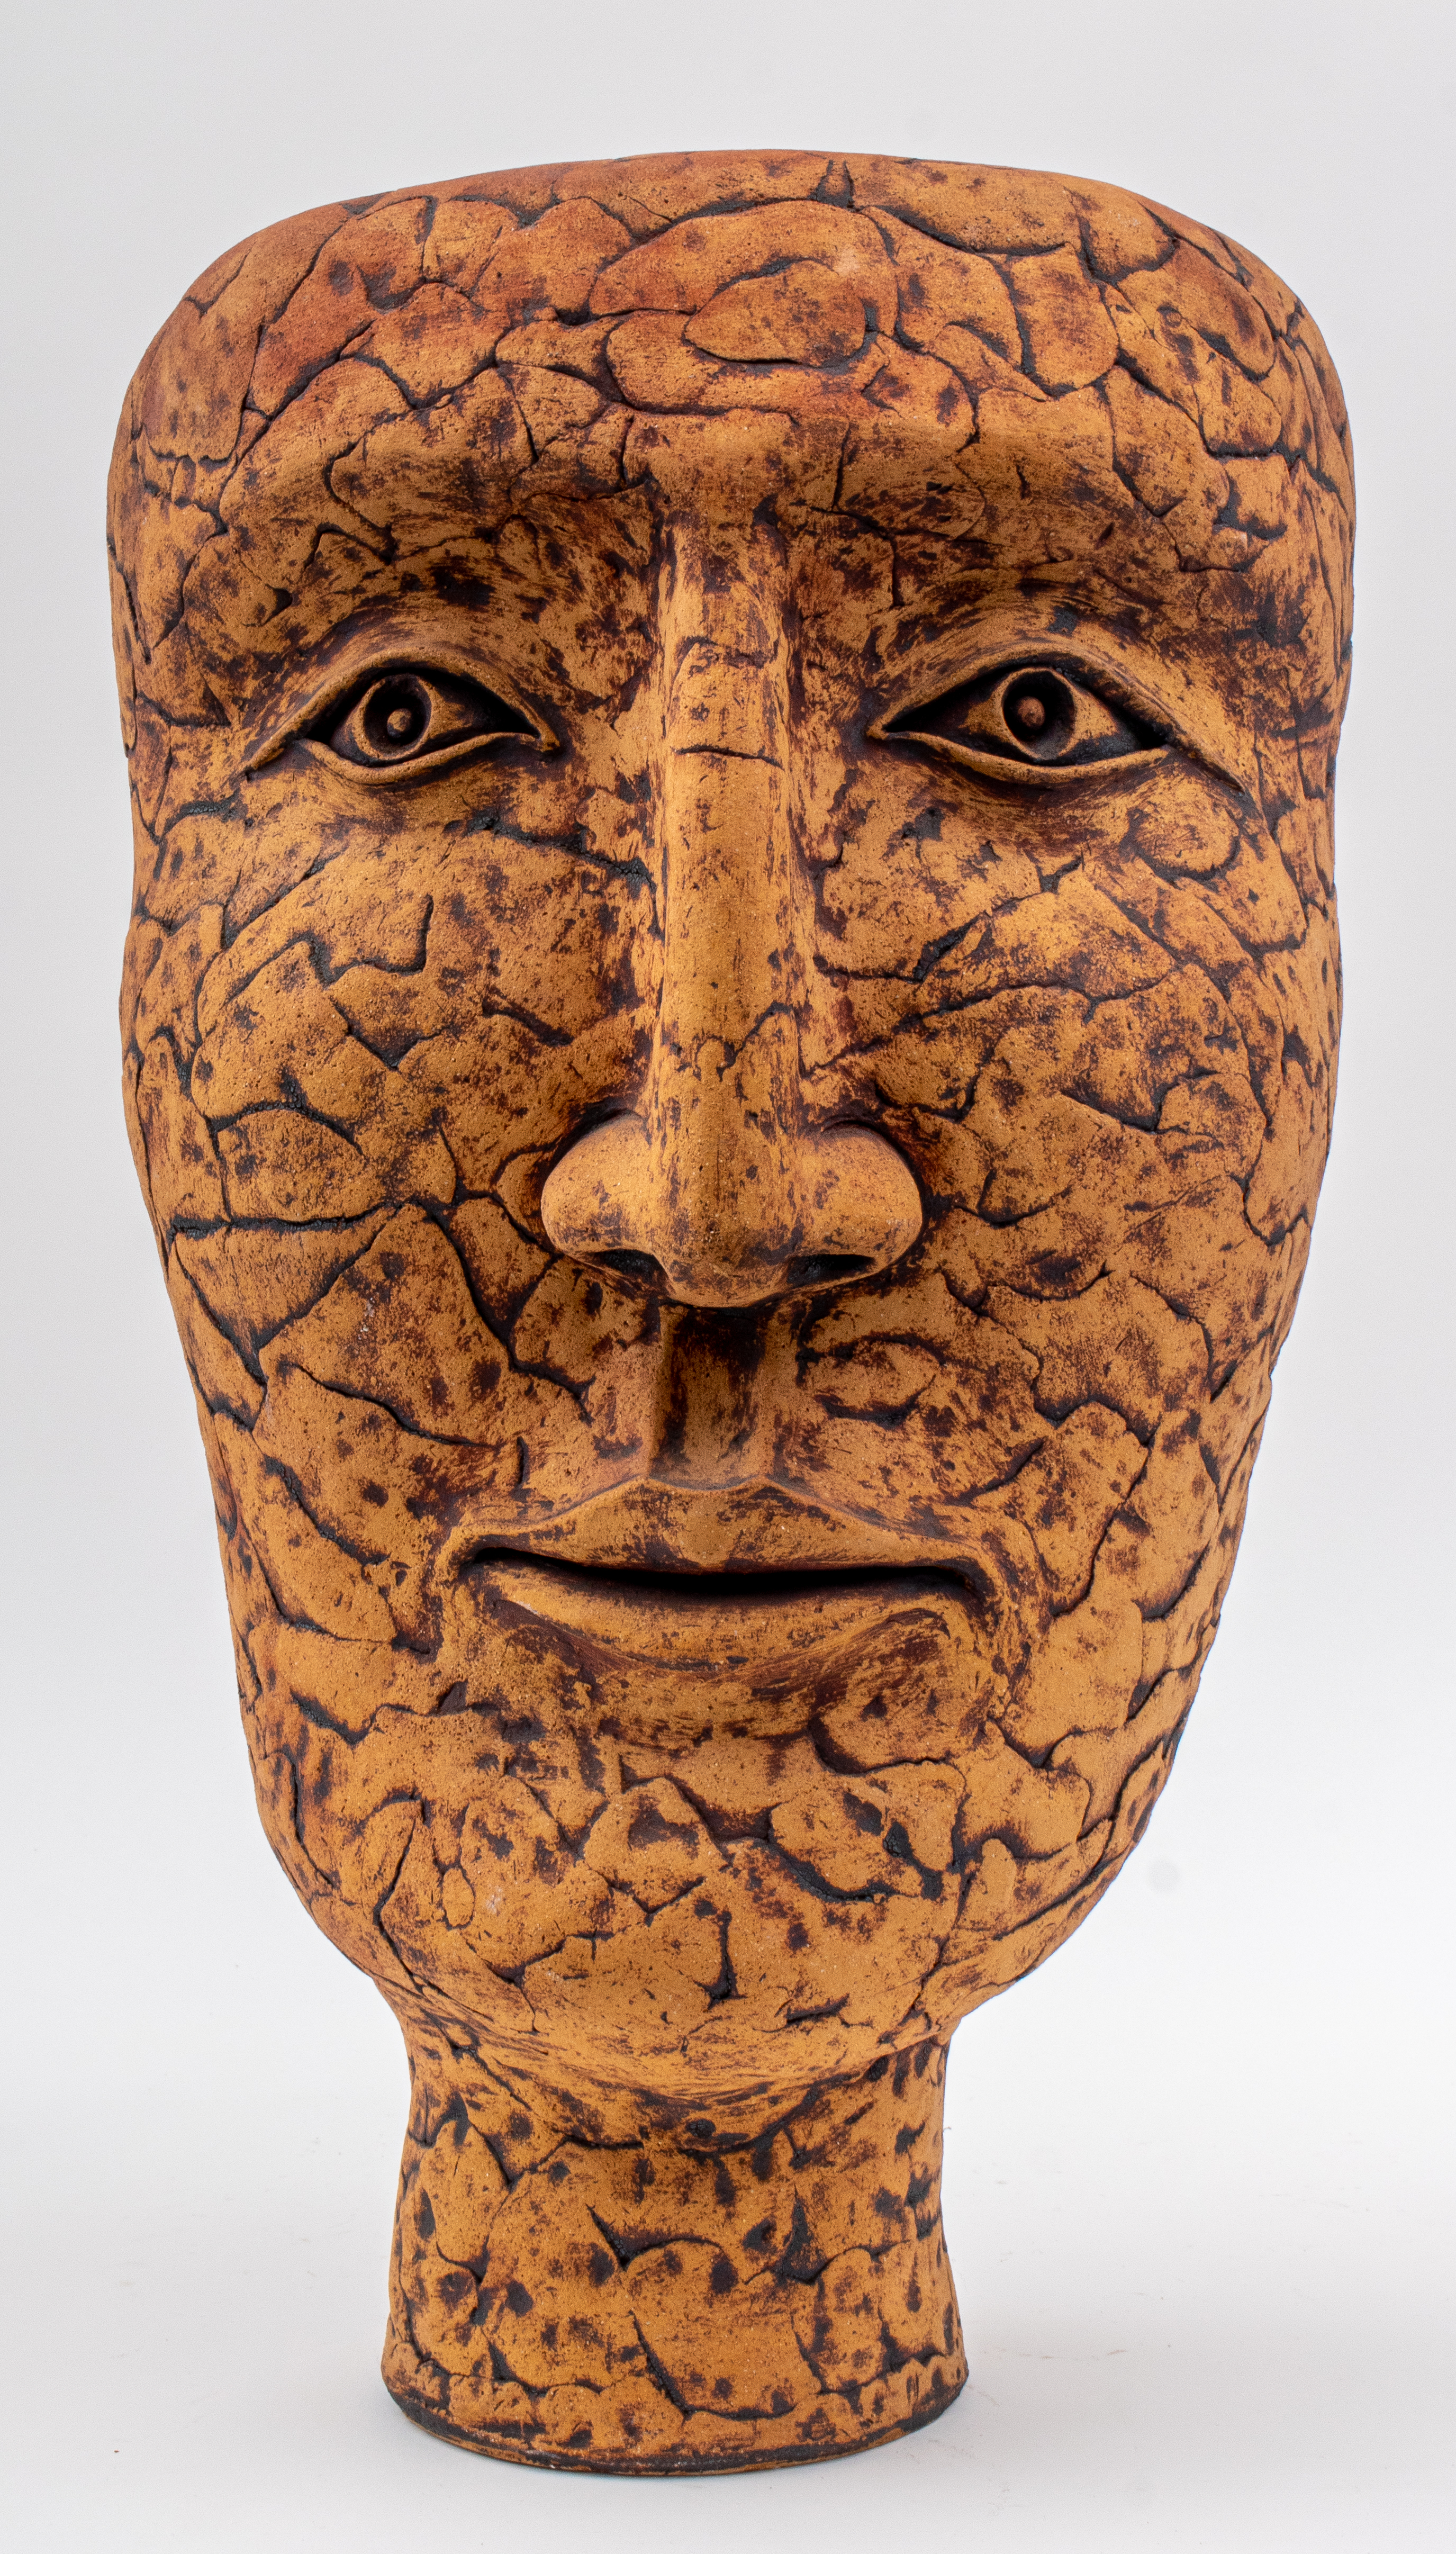 LOUIS MENDEZ ABSTRACTED HEAD CERAMIC 2be433